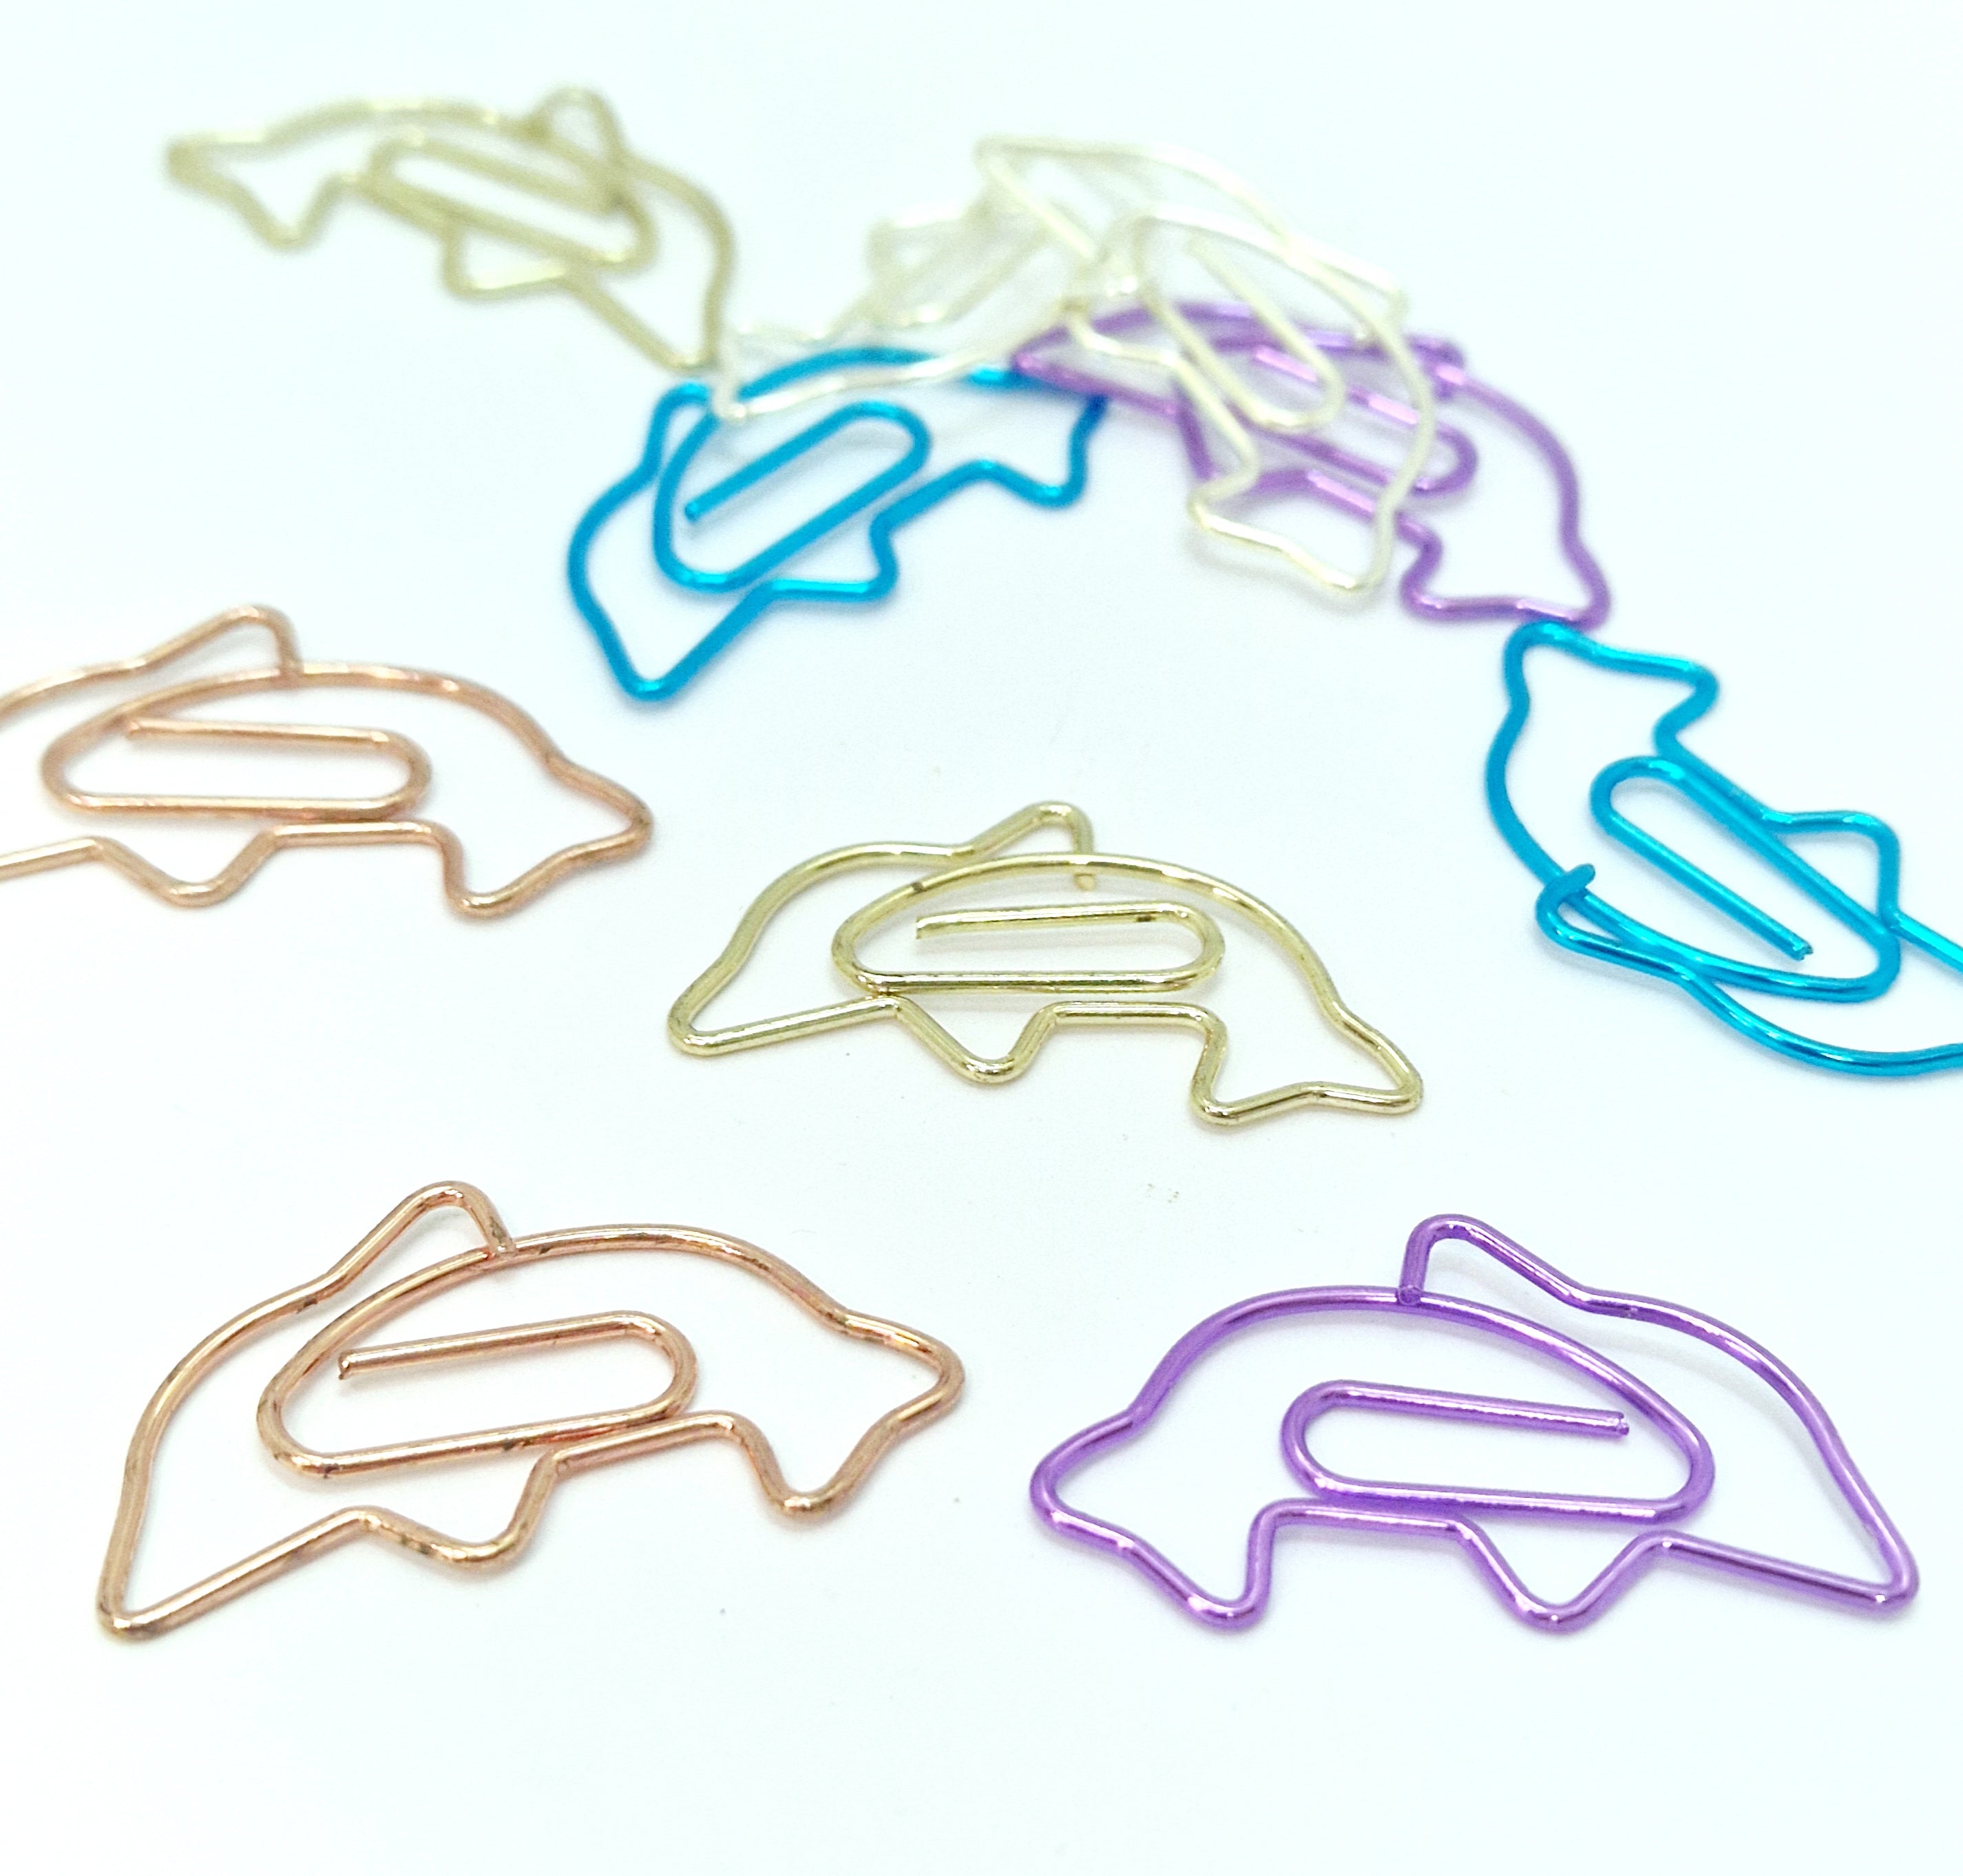 MajorCrafts 10pcs Mixed Colours Dolphin Shaped Novelty Metal Paper Clips 32x18mm